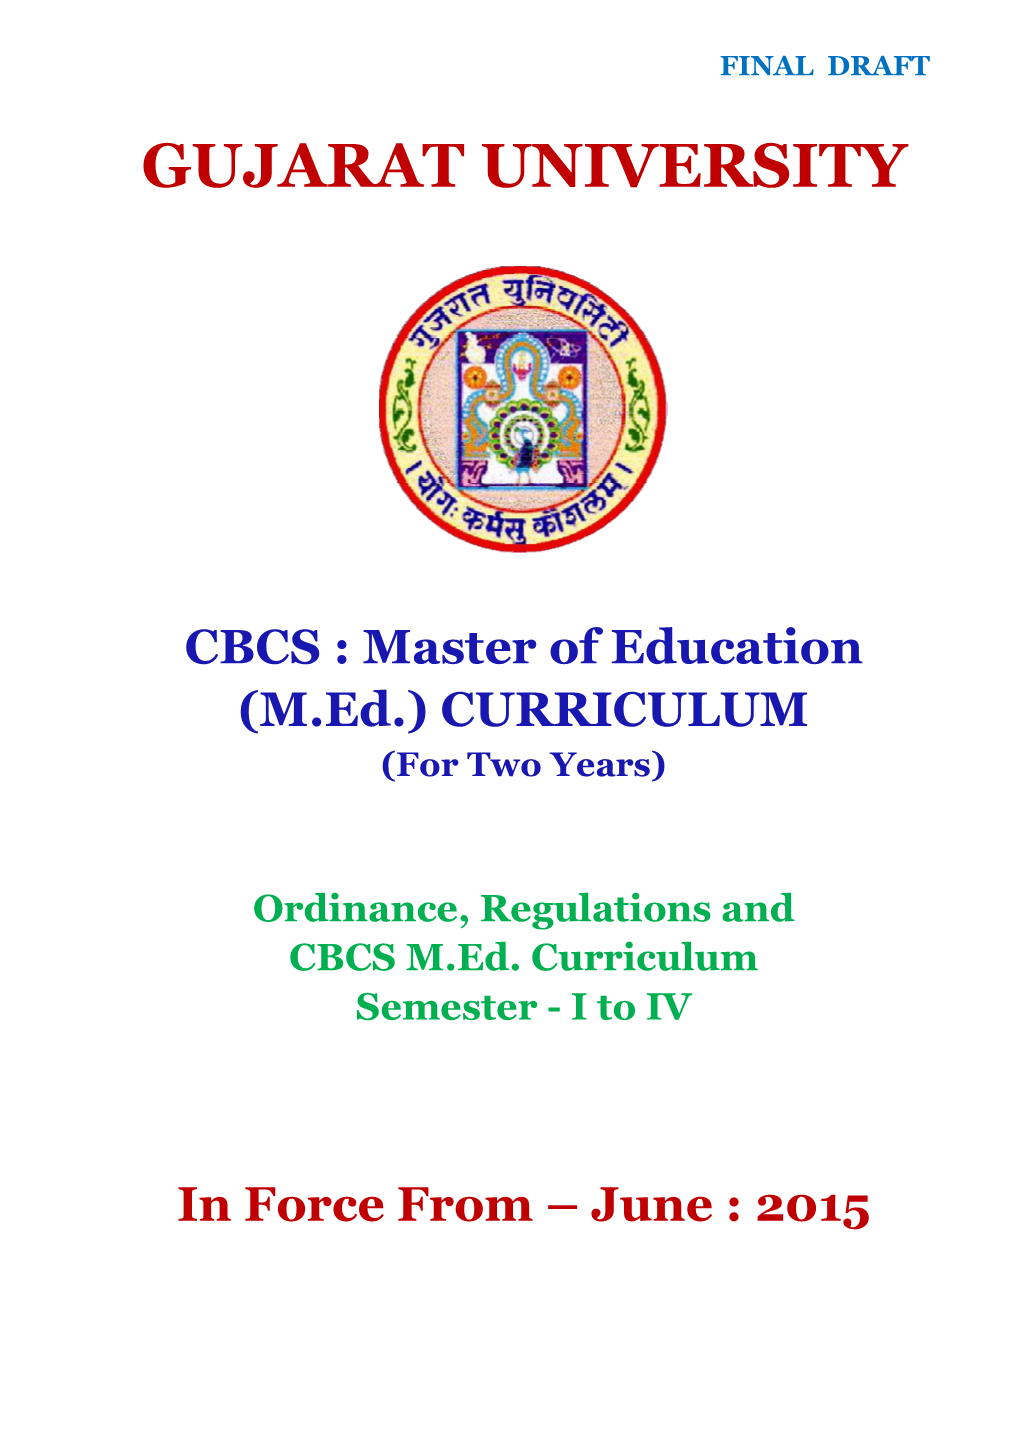 Master of Education (M.Ed.) CURRICULUM (For Two Years)